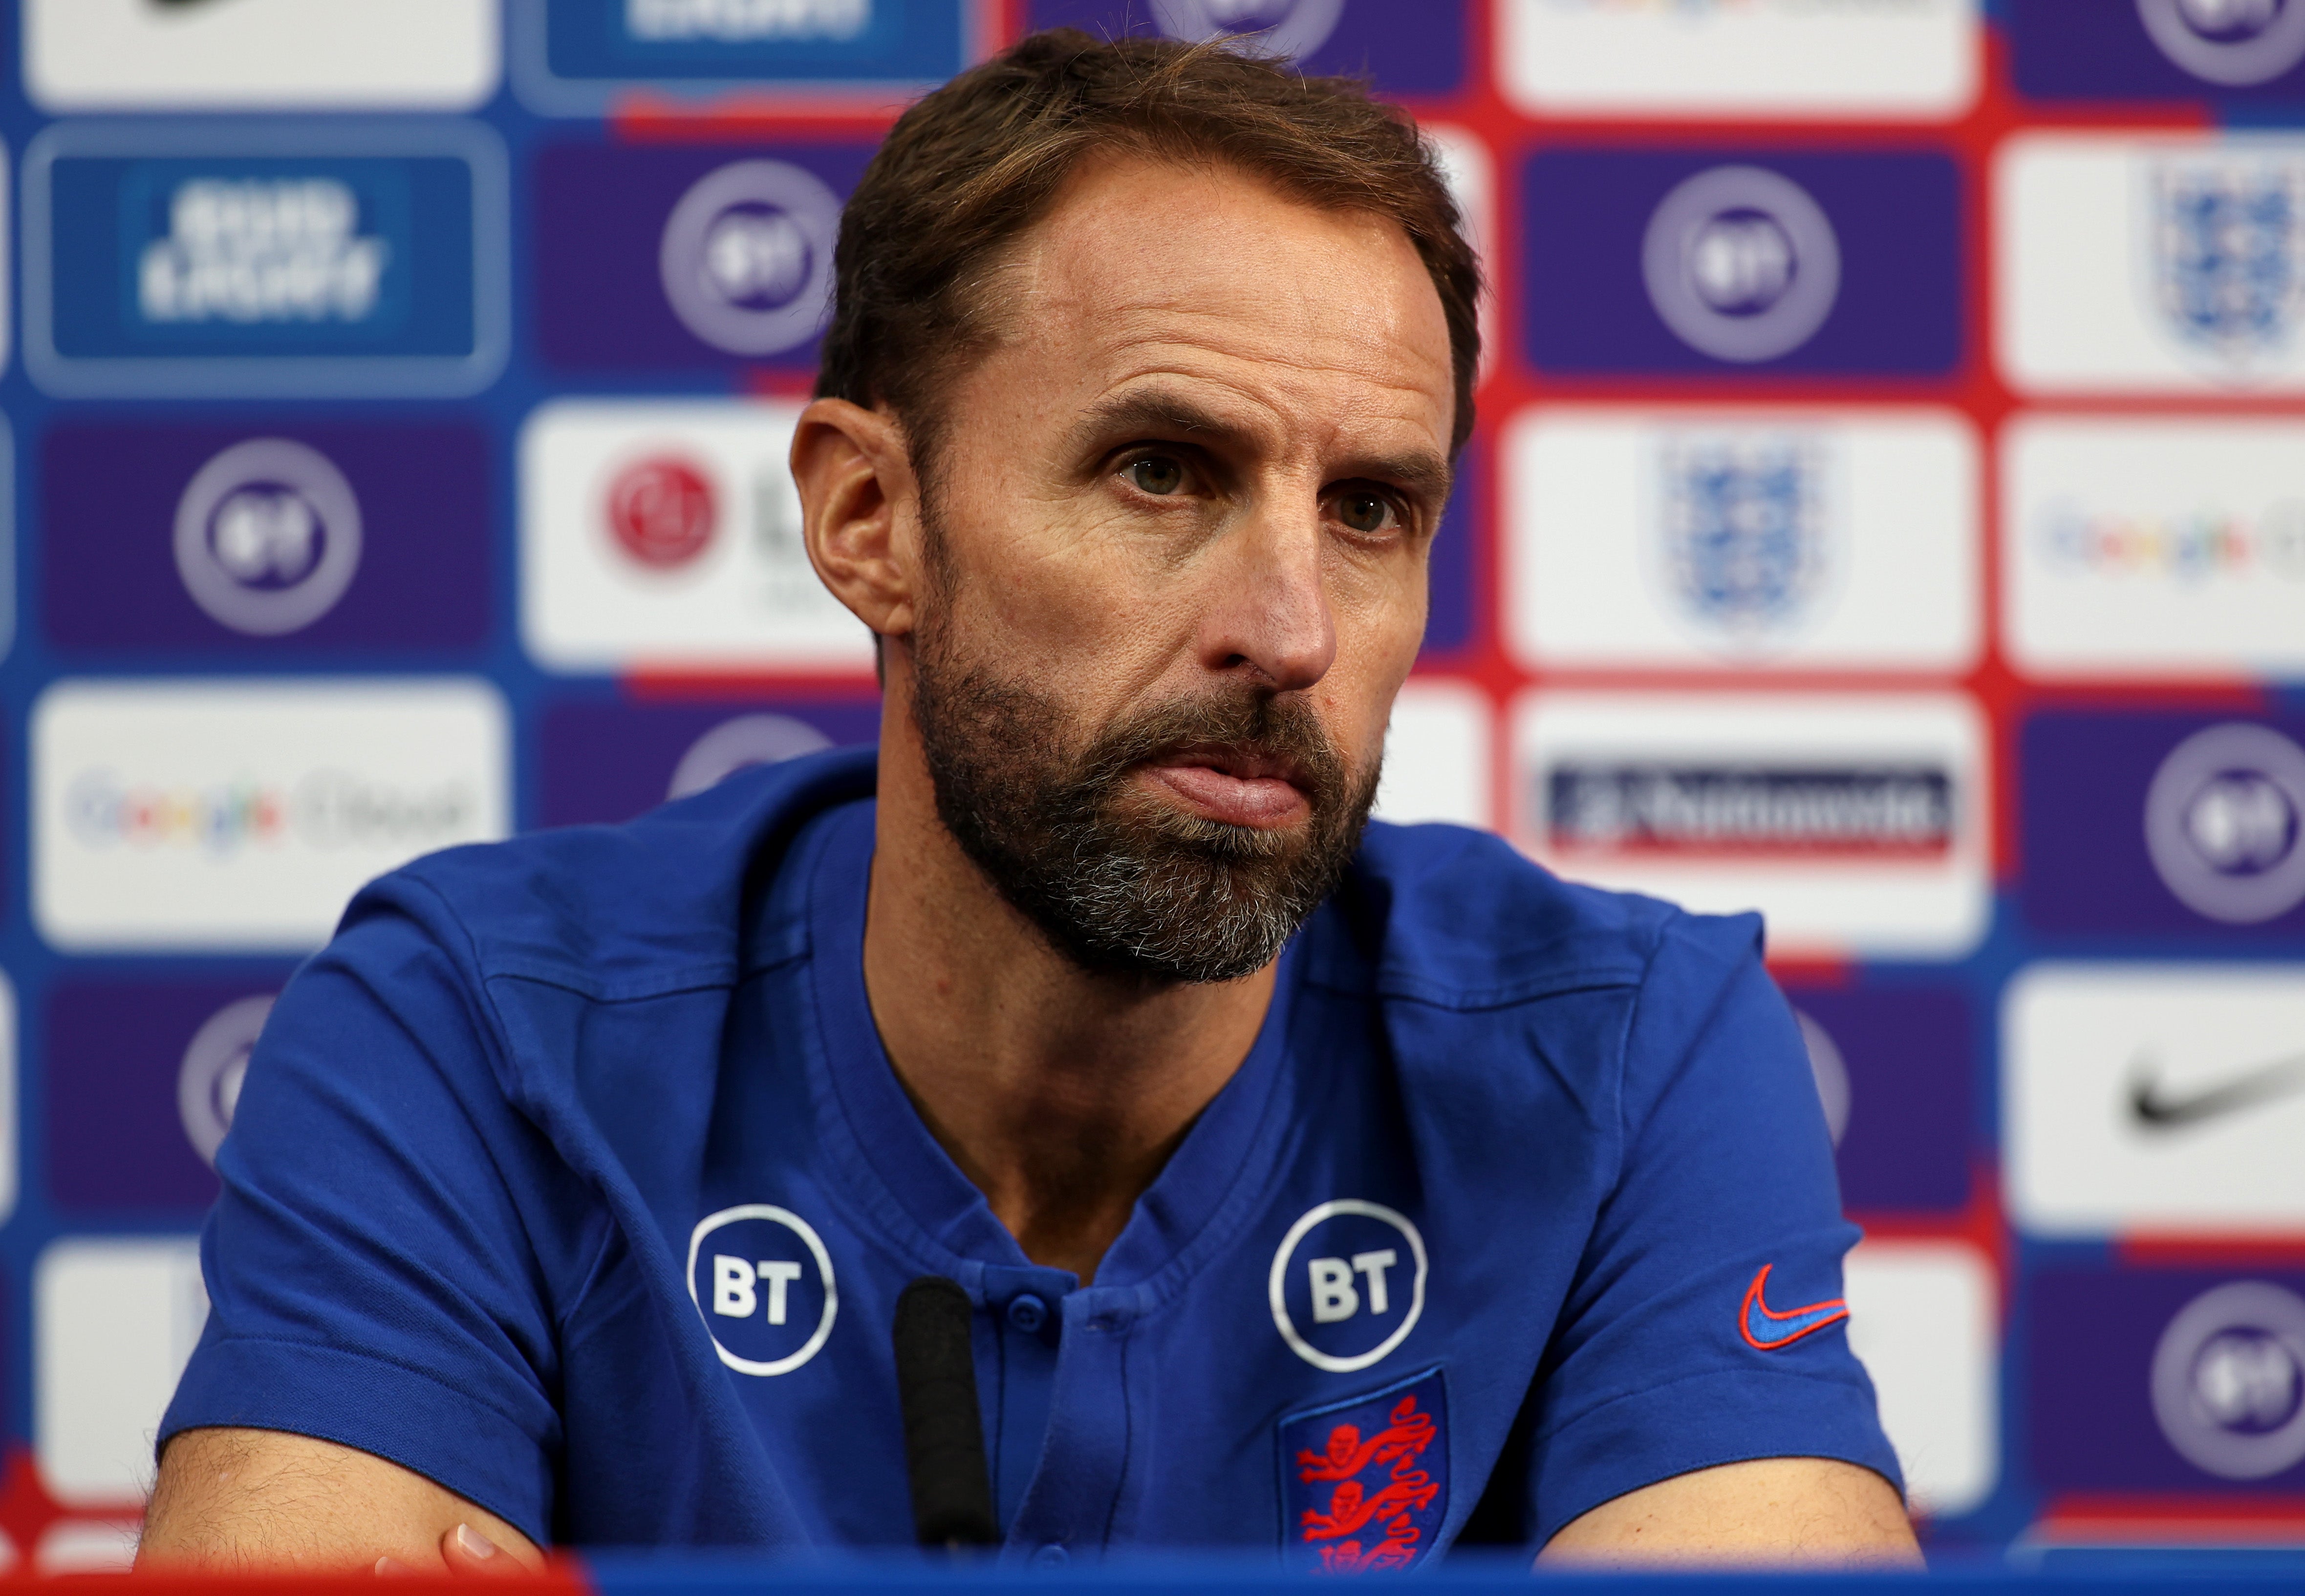 Gareth Southgate wants England to ‘reset’ after their success at Euro 2020